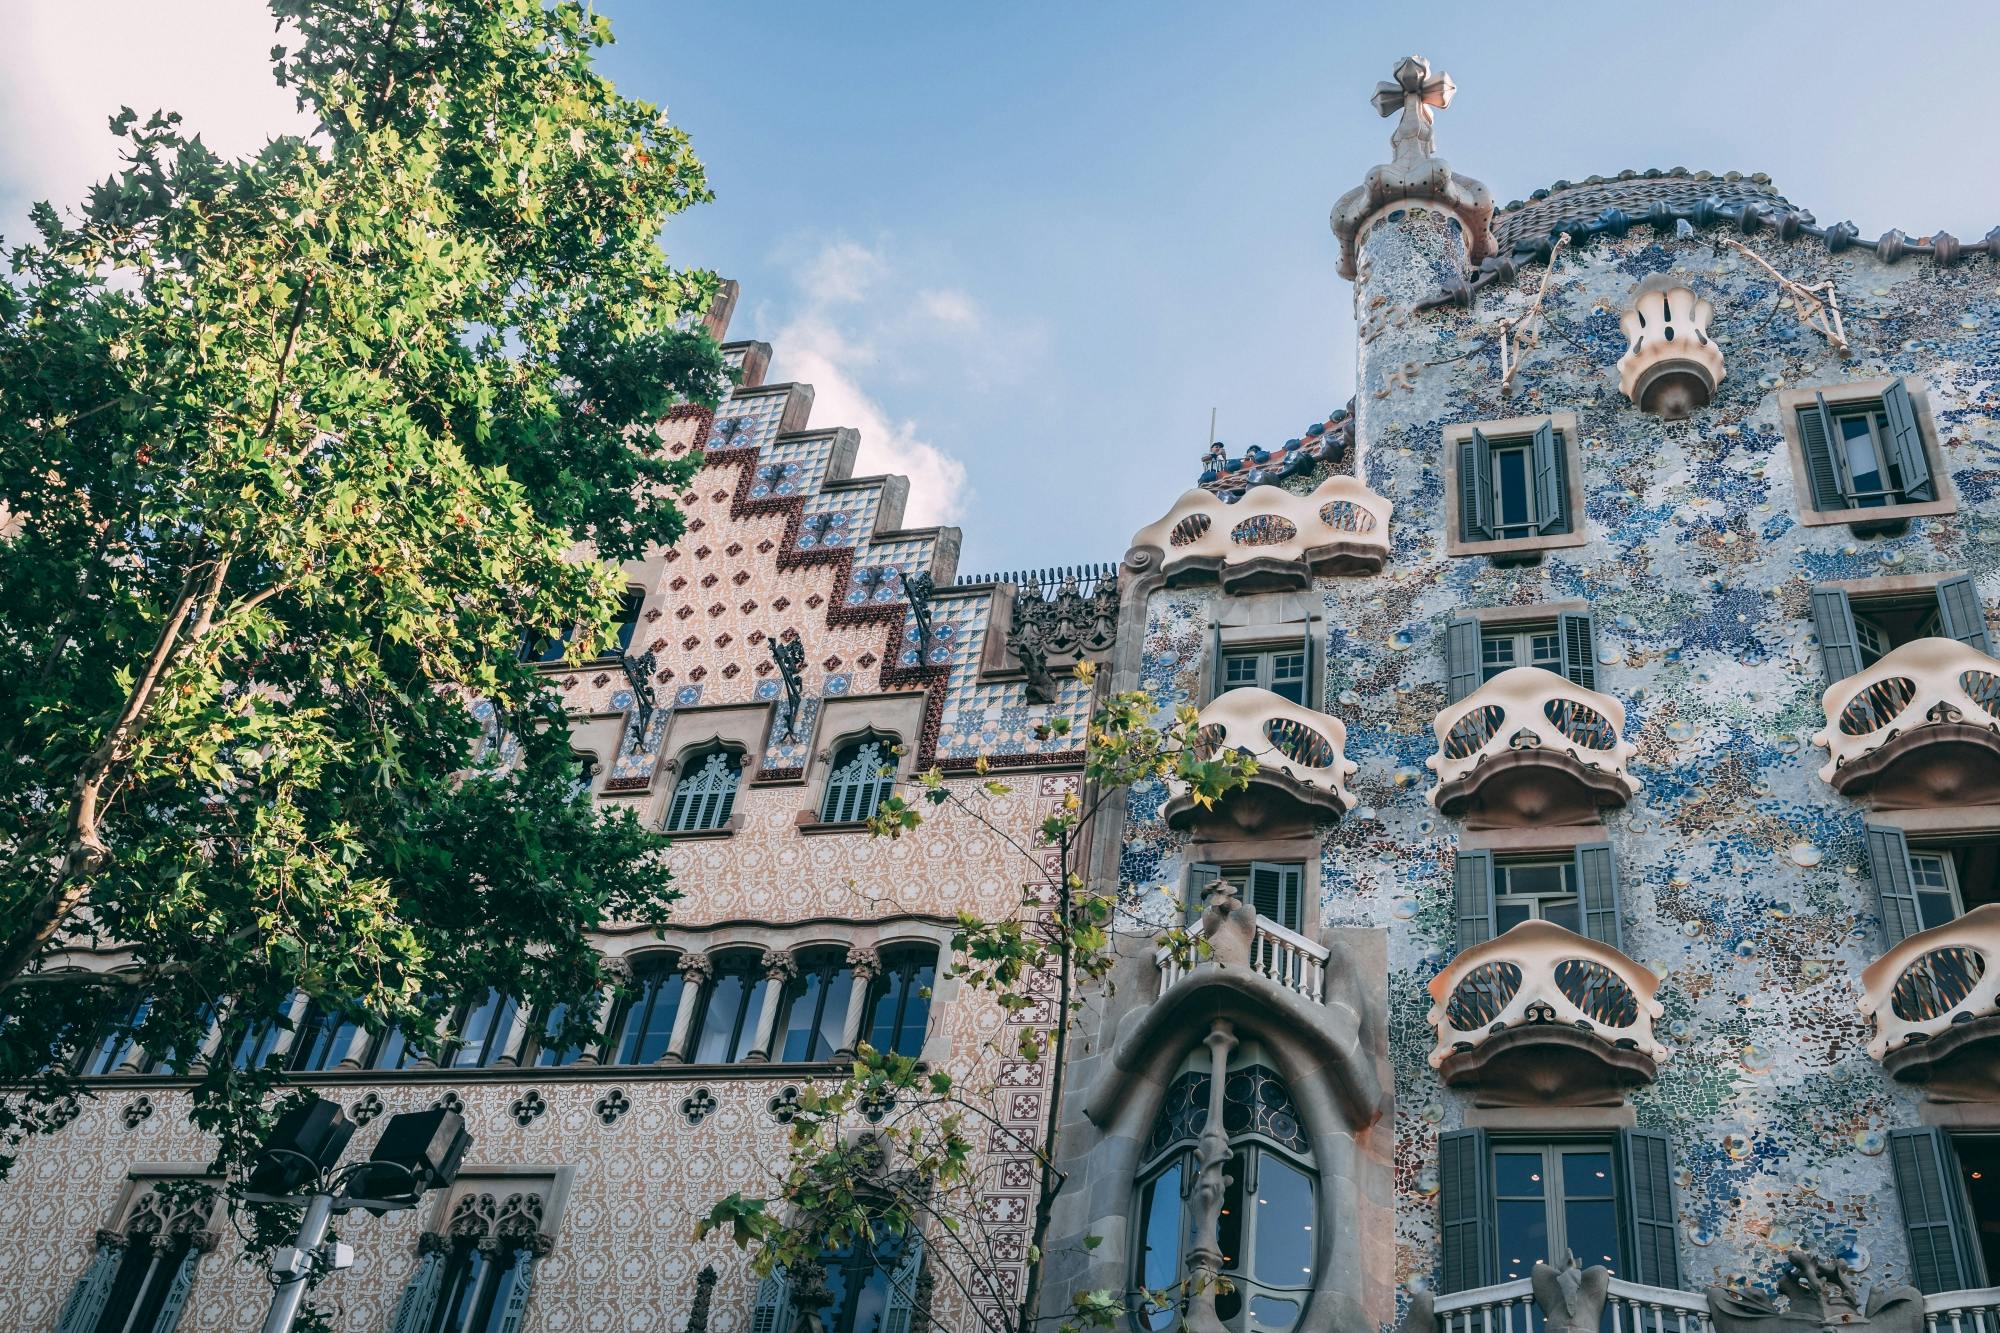 Best of Gaudí private walking tour in Barcelona with a local guide